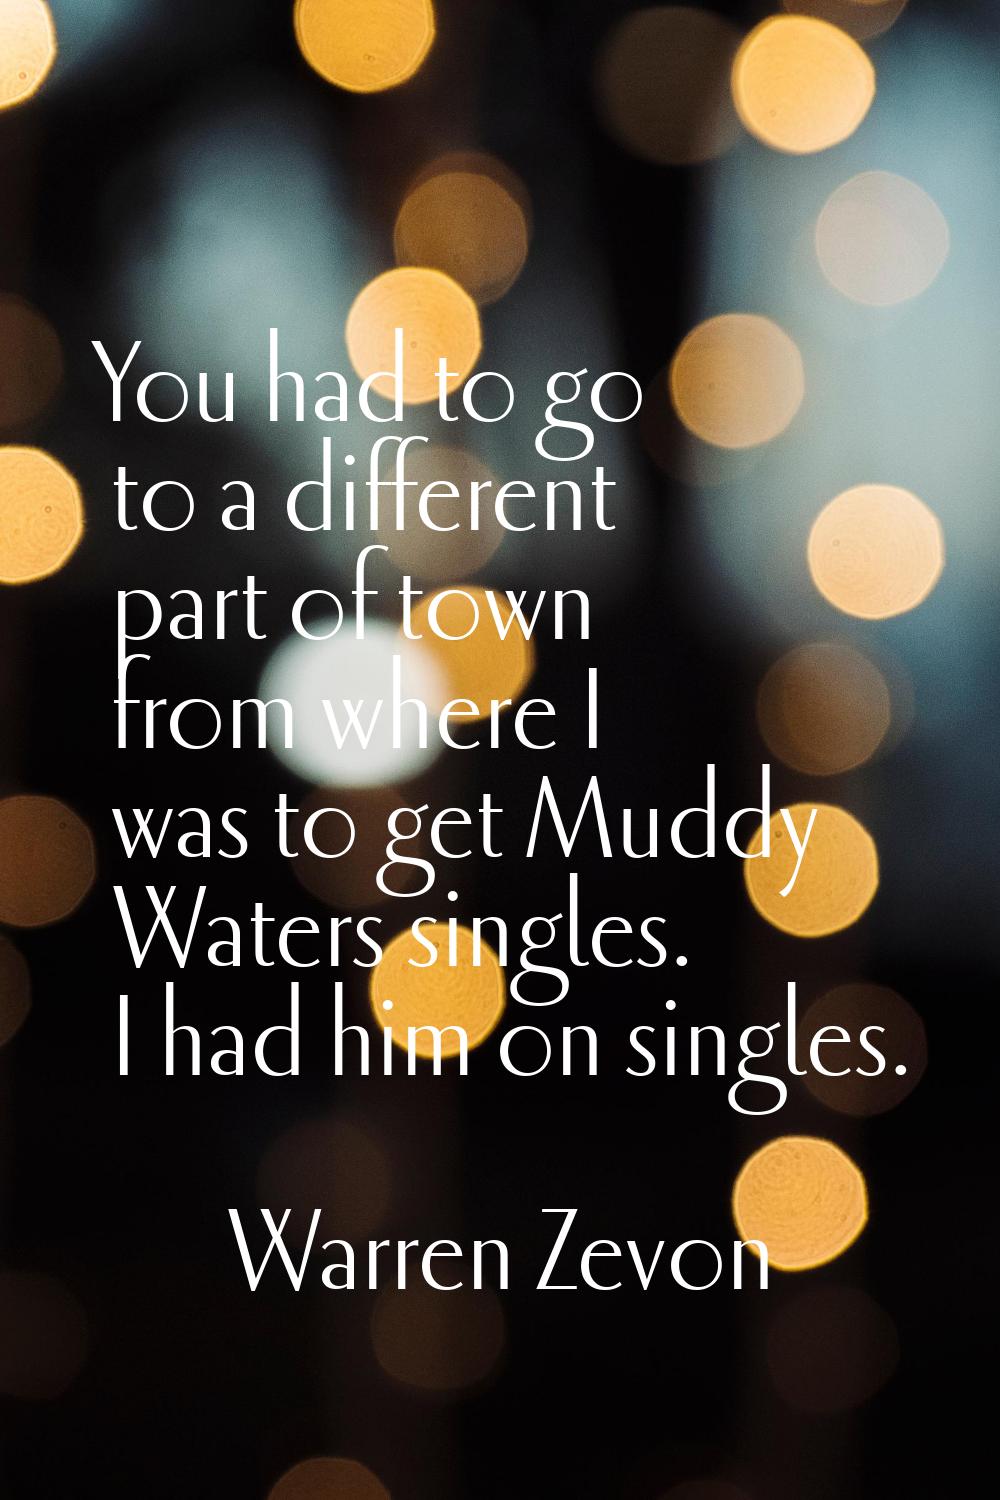 You had to go to a different part of town from where I was to get Muddy Waters singles. I had him o